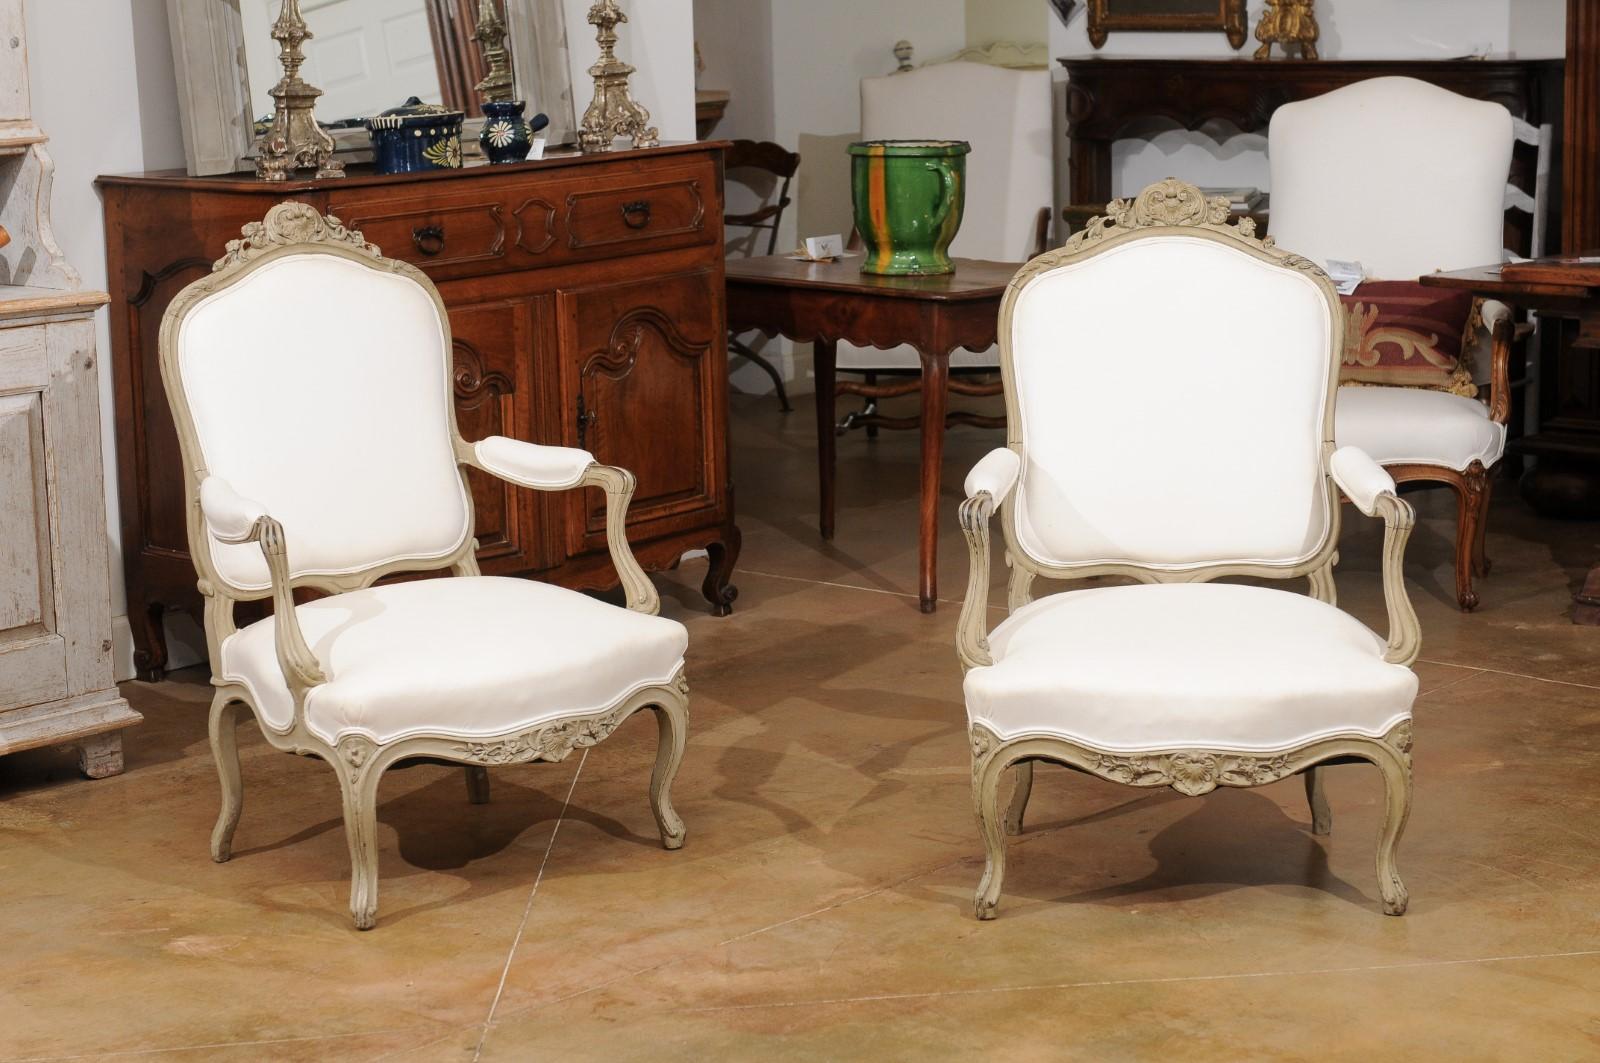 A pair of French Napoléon III period painted wood armchairs from the mid 19th century, with carved floral and foliage décor. Created in France at the beginning of Emperor Napoléon III's reign, each of this pair of fauteuils features a slightly